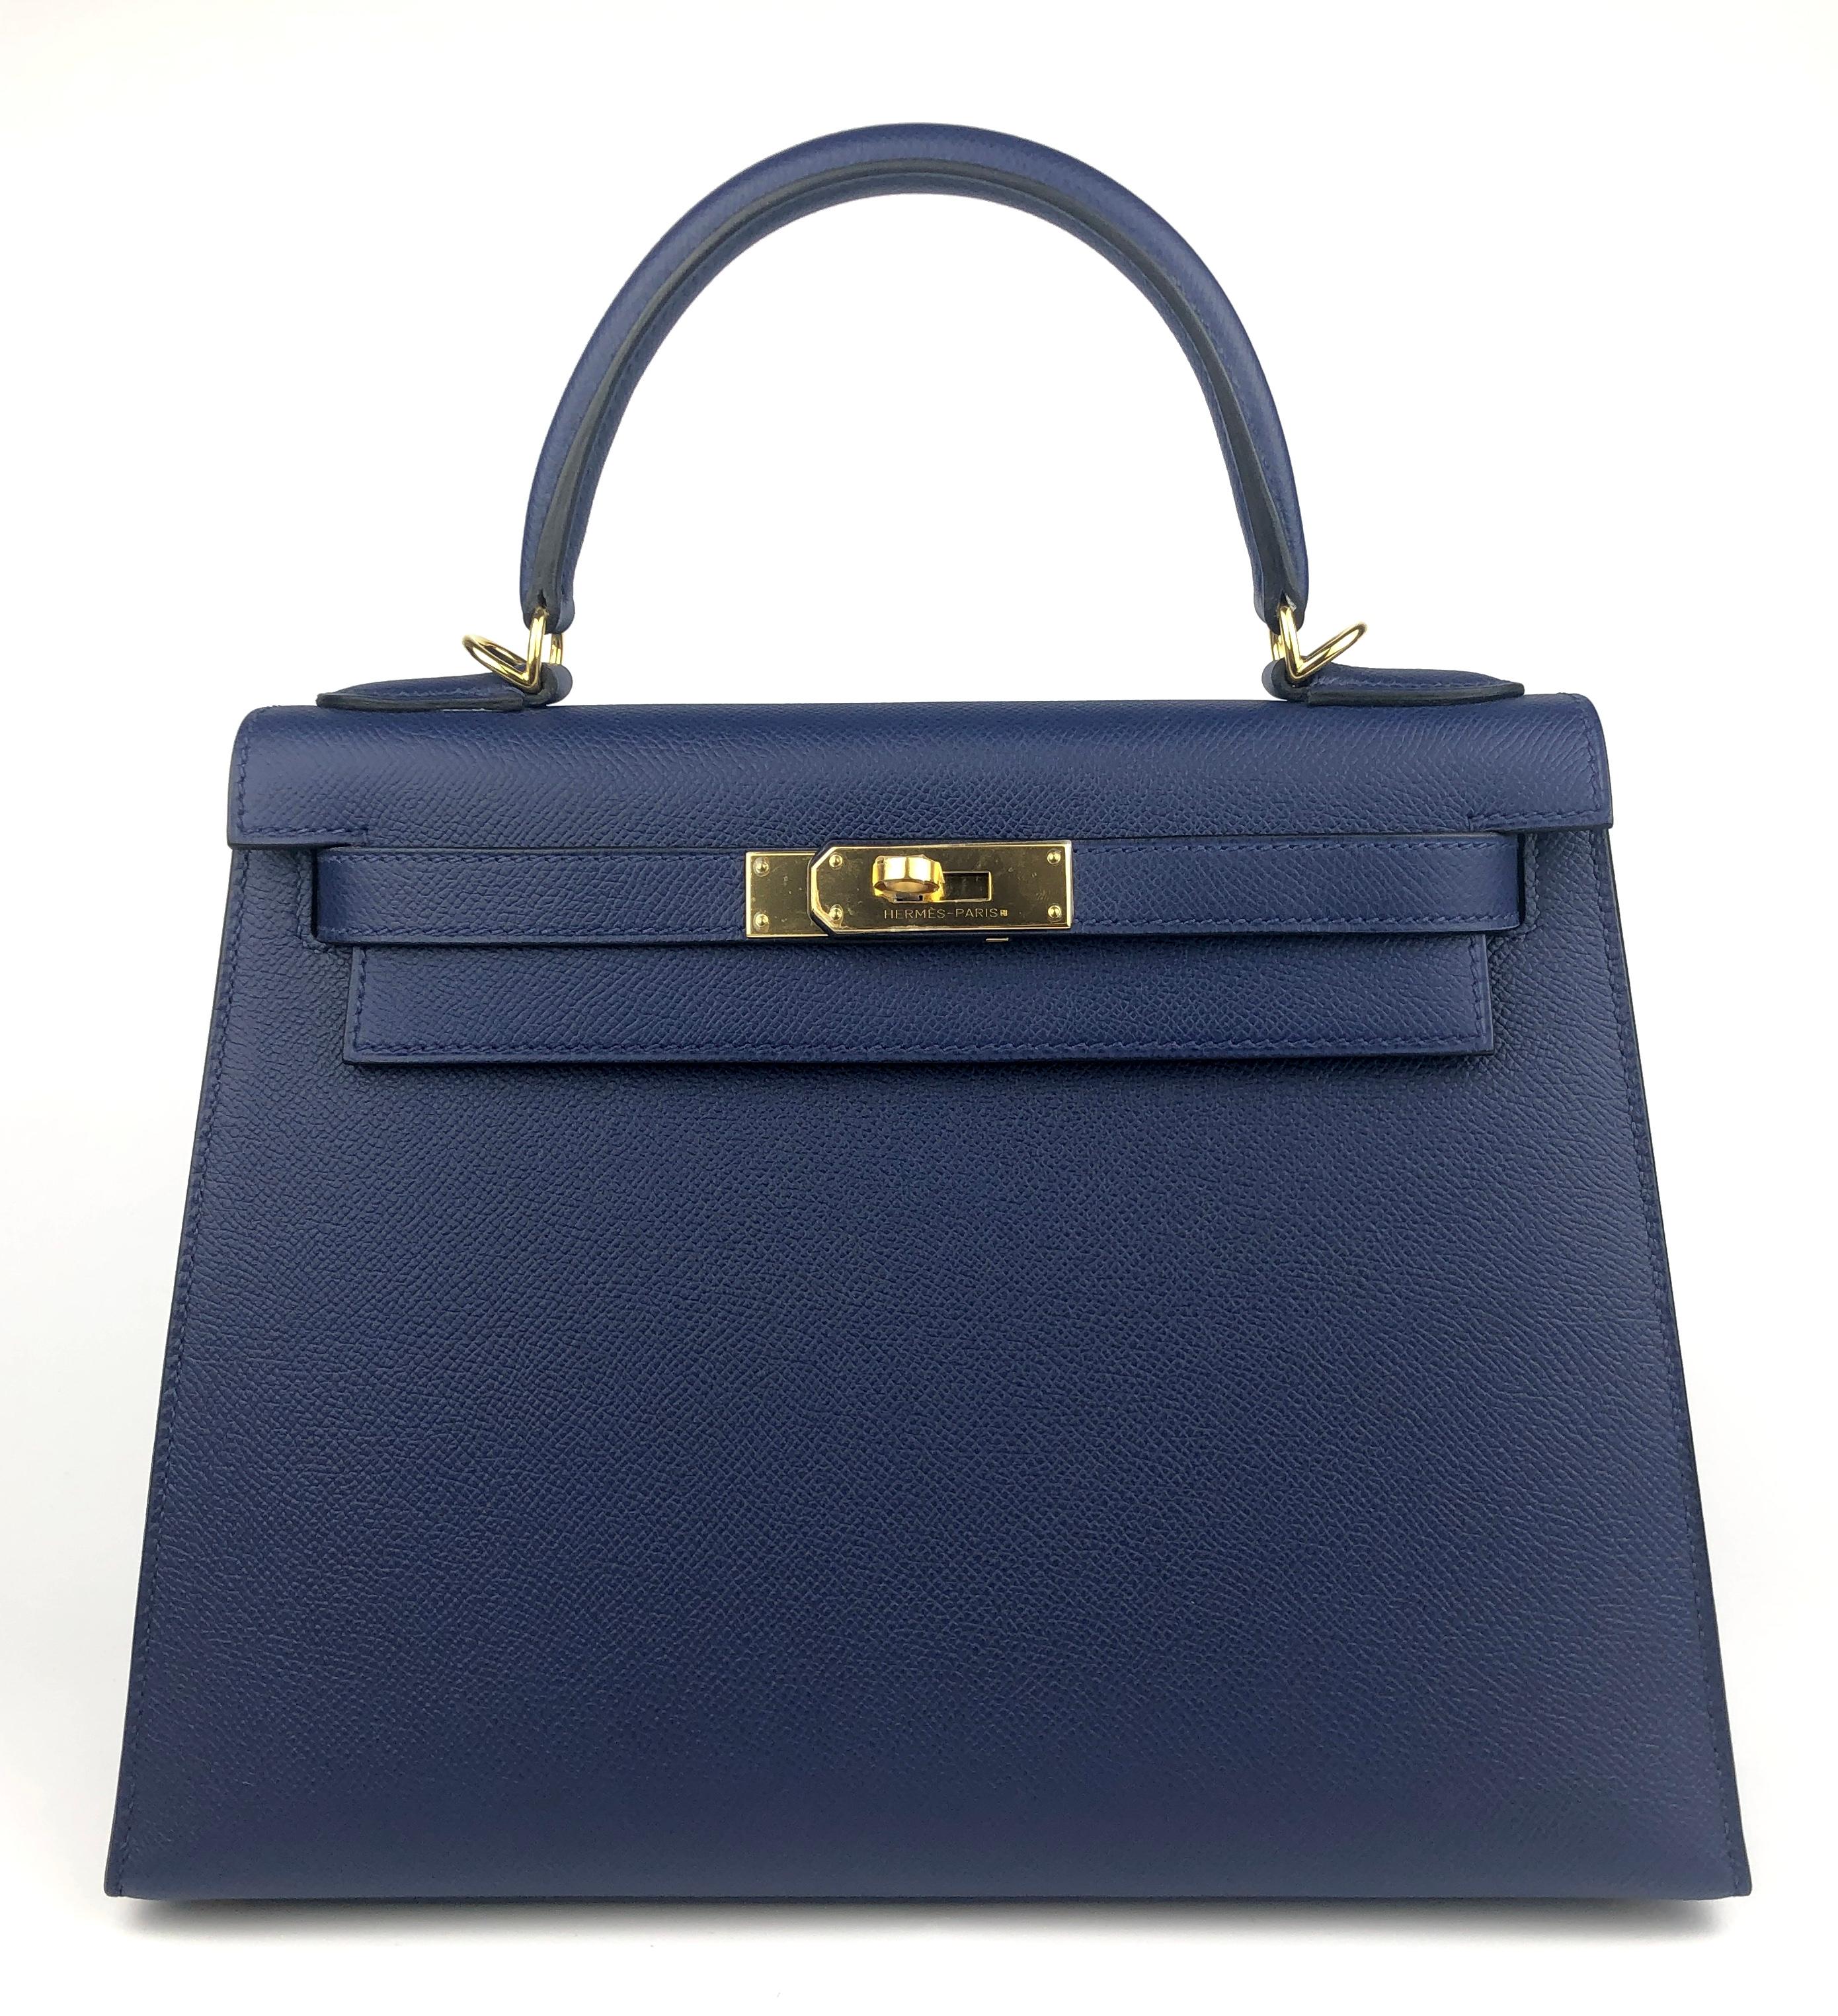 Absolutely Stunning Like New Hermes Kelly 28 Sellier Blue Sapphire Epsom Leather complimented by Gold Hardware. Plastic on all hardware and feet. 2015 T Stamp.

Shop with Confidence from Lux Addicts. Authenticity Guaranteed! 